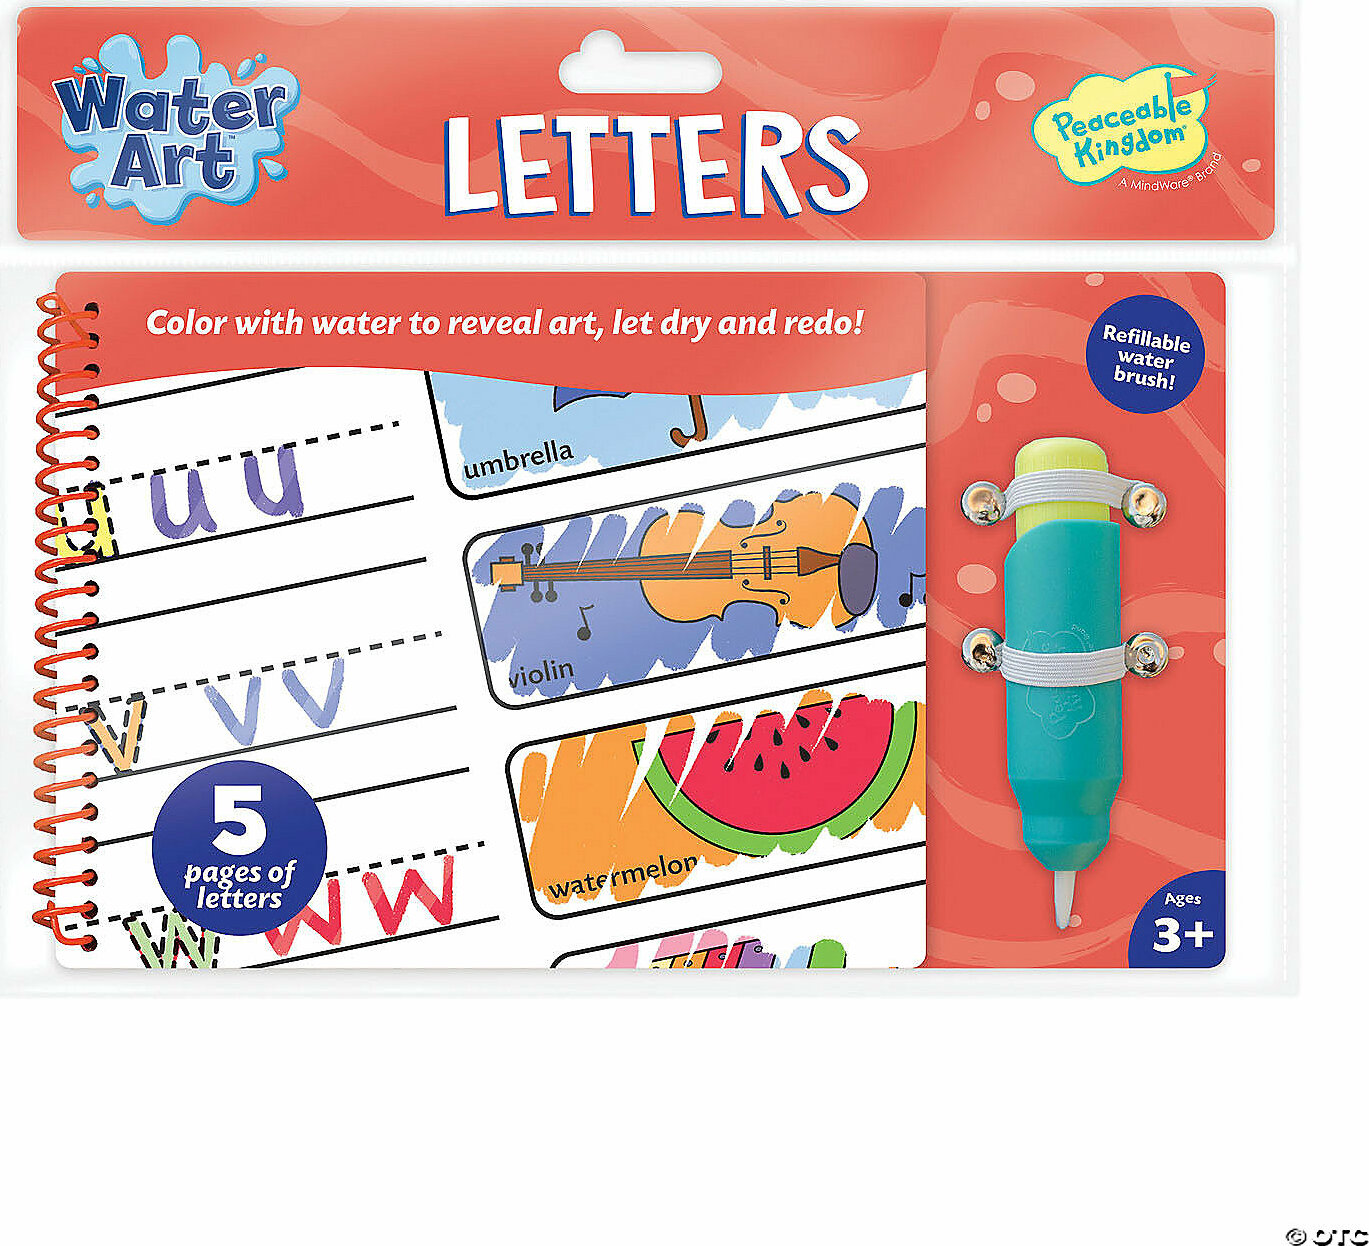 Water Art Book: Letters